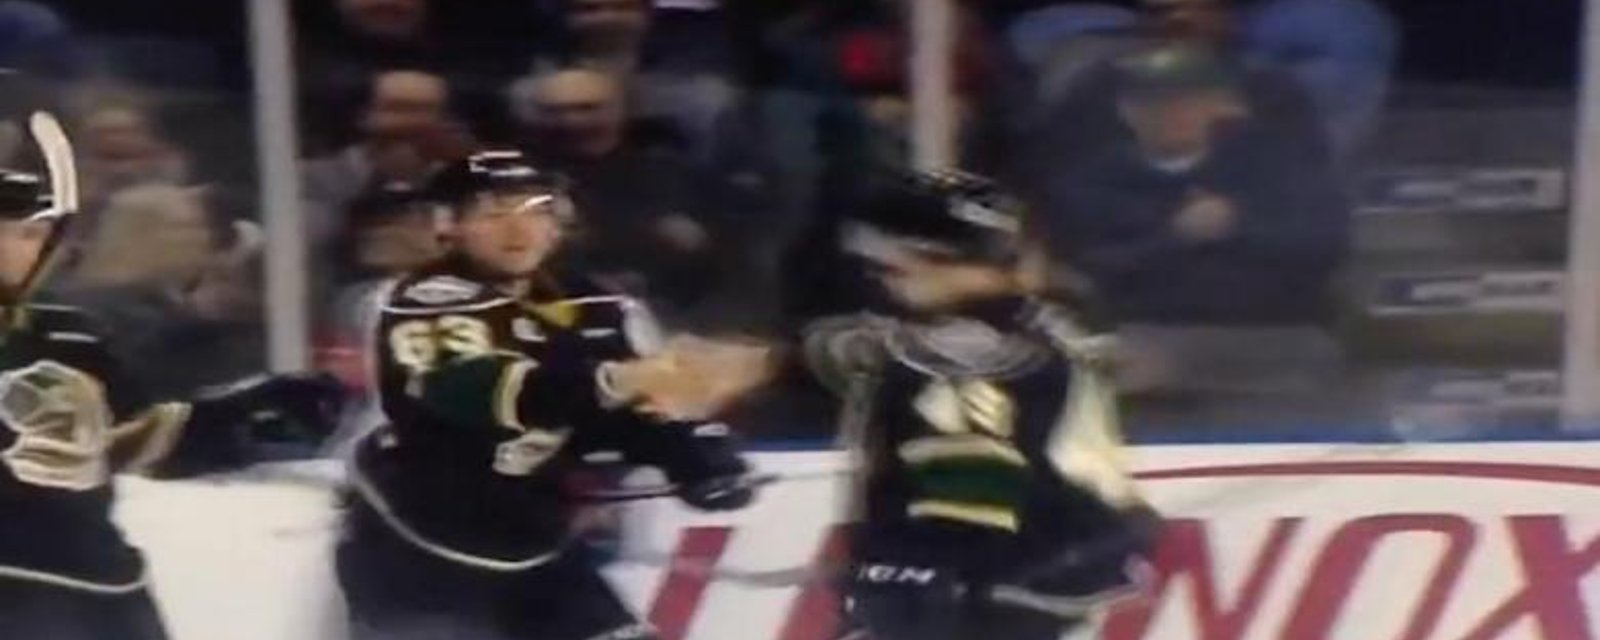 Hilarious: Celebration of the year in the Hockey World.